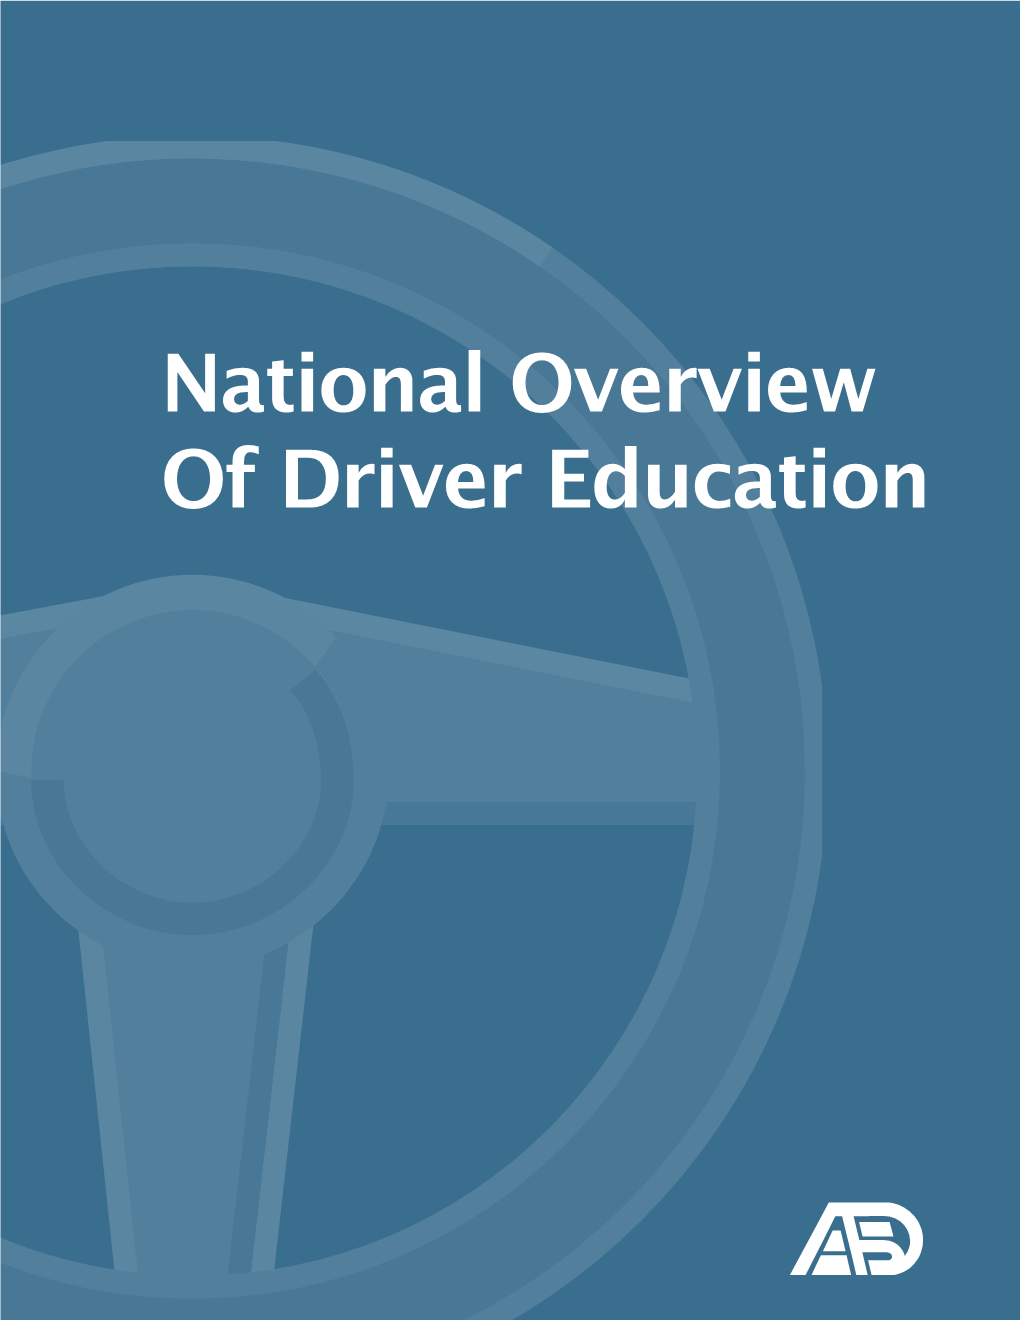 National Overview of Driver Education